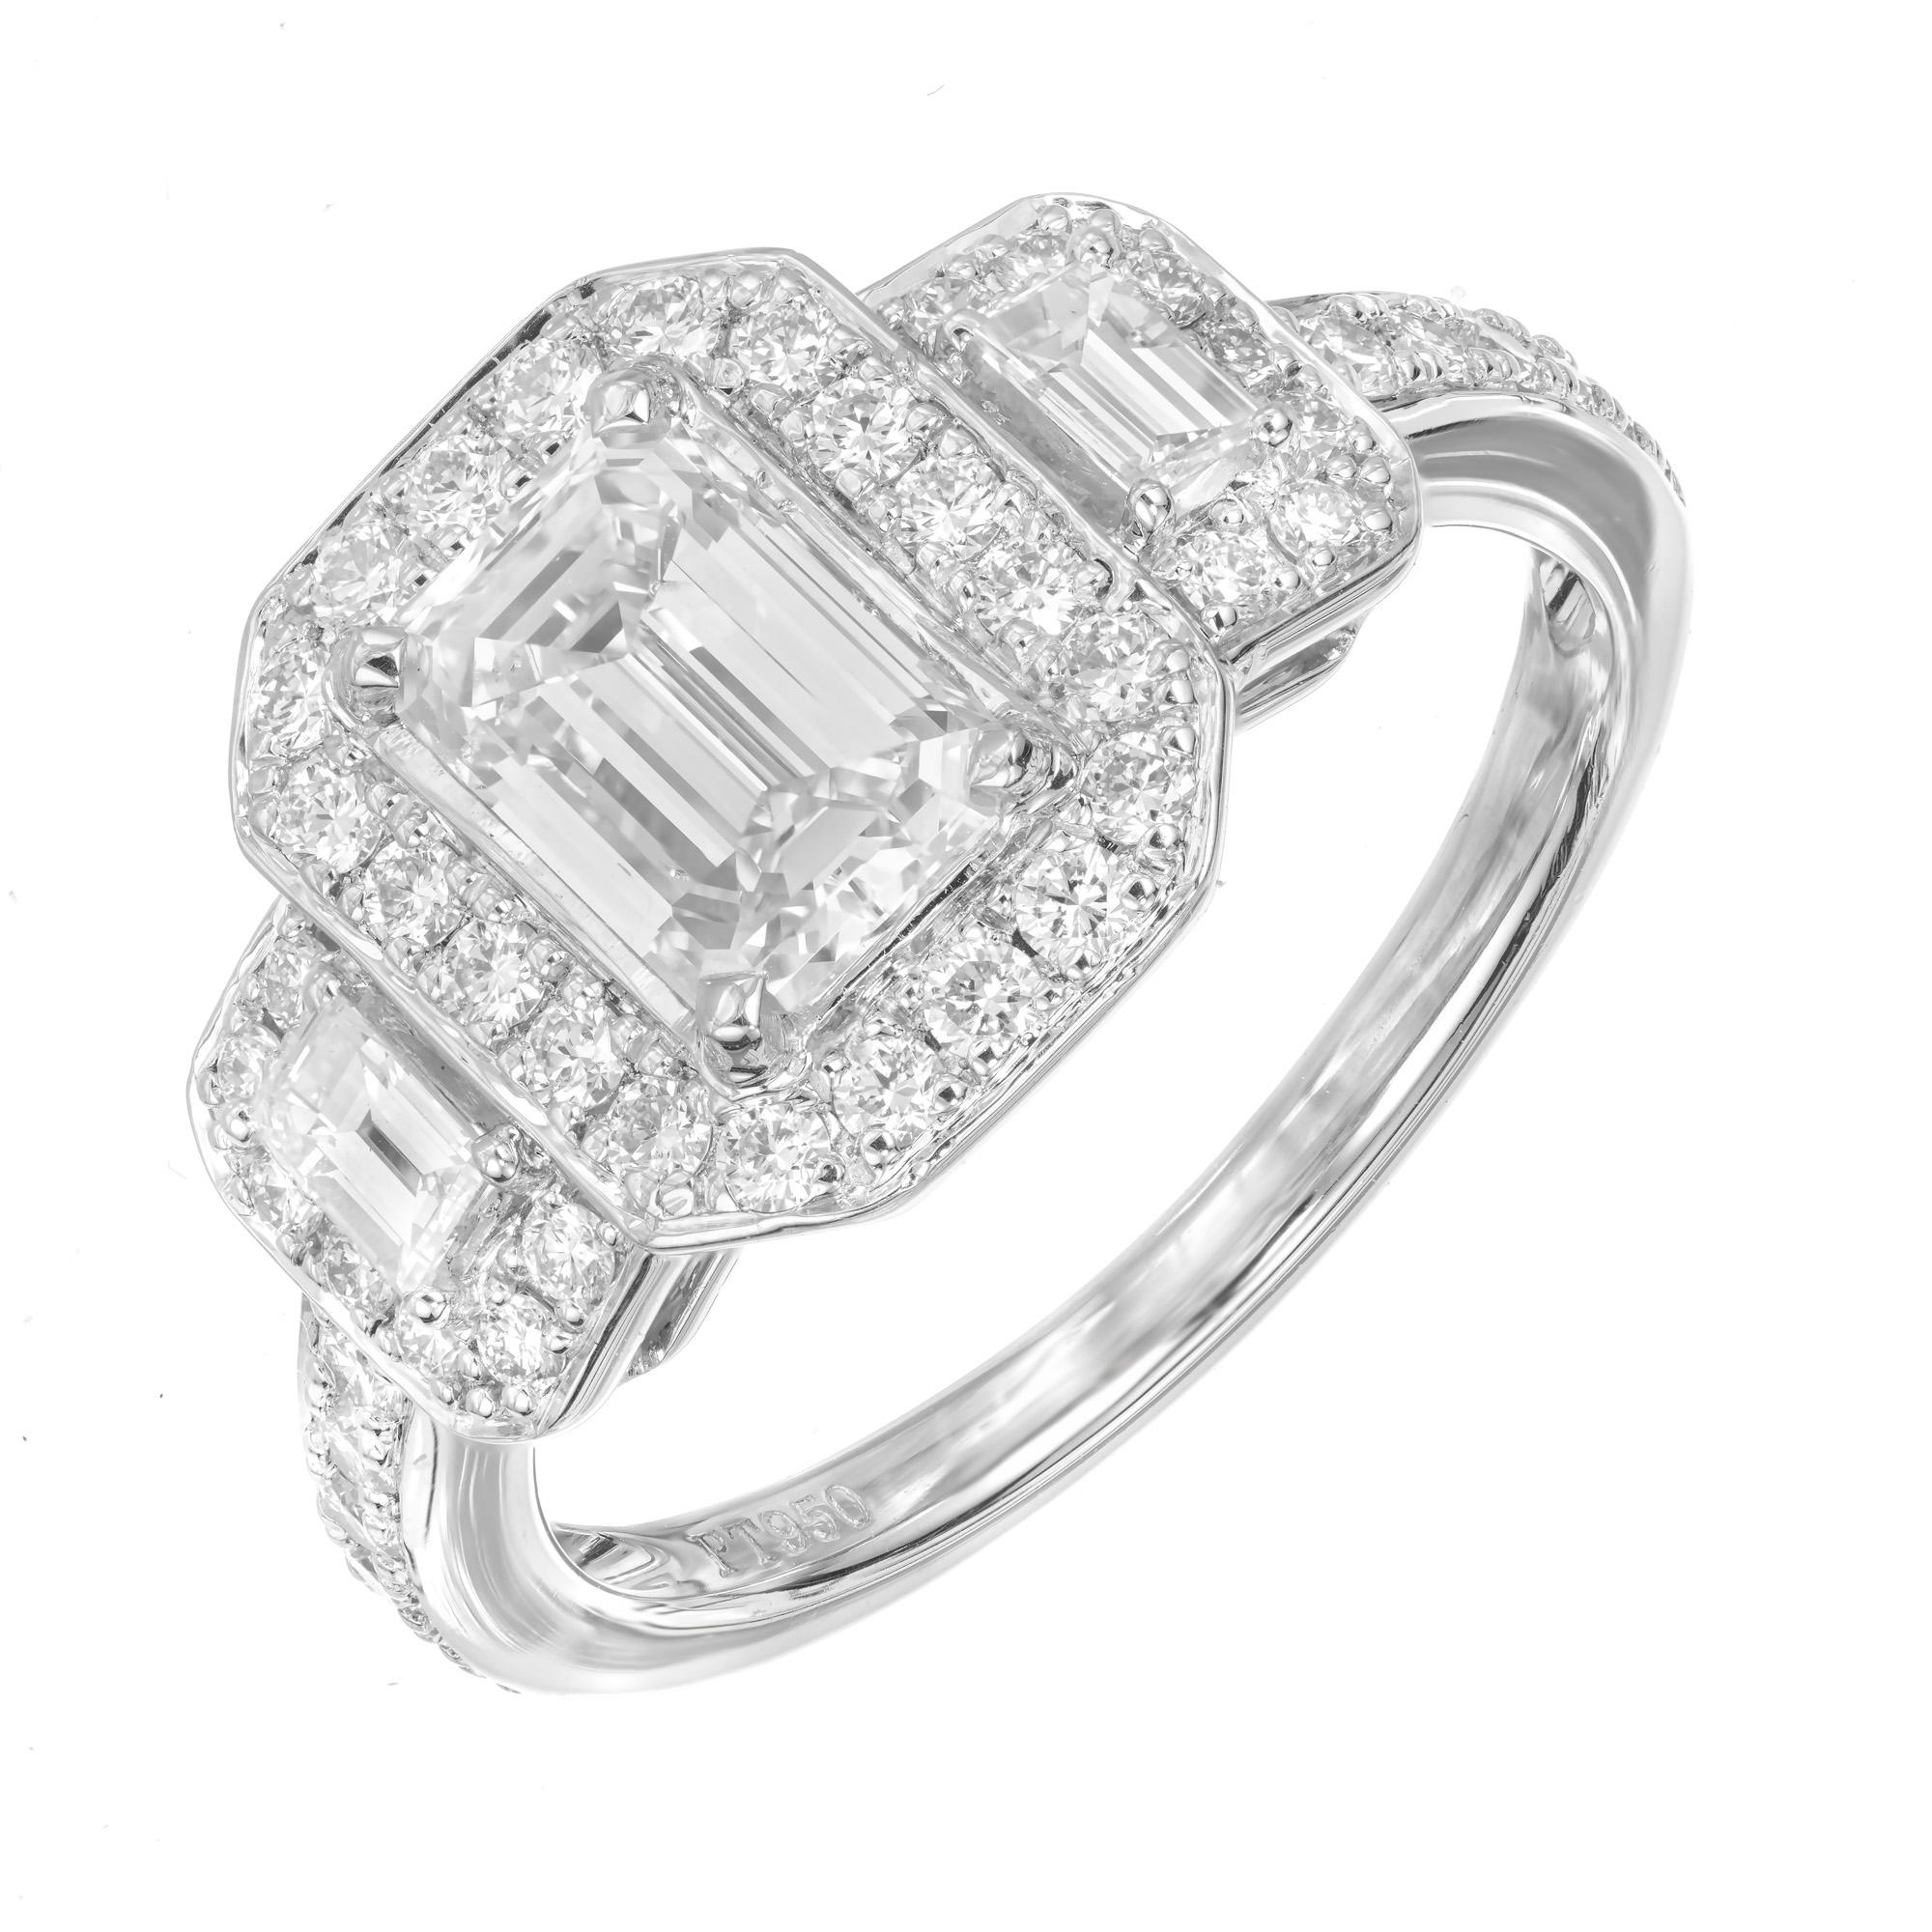 Diamond three-stone engagement ring. GIA certified center emerald cut 1.08ct diamond with 2 emerald cut side stones. Each stone has a halo of round brilliant cut diamonds that are also along the shank. The 3 stones are from a 1920's estate. The ring